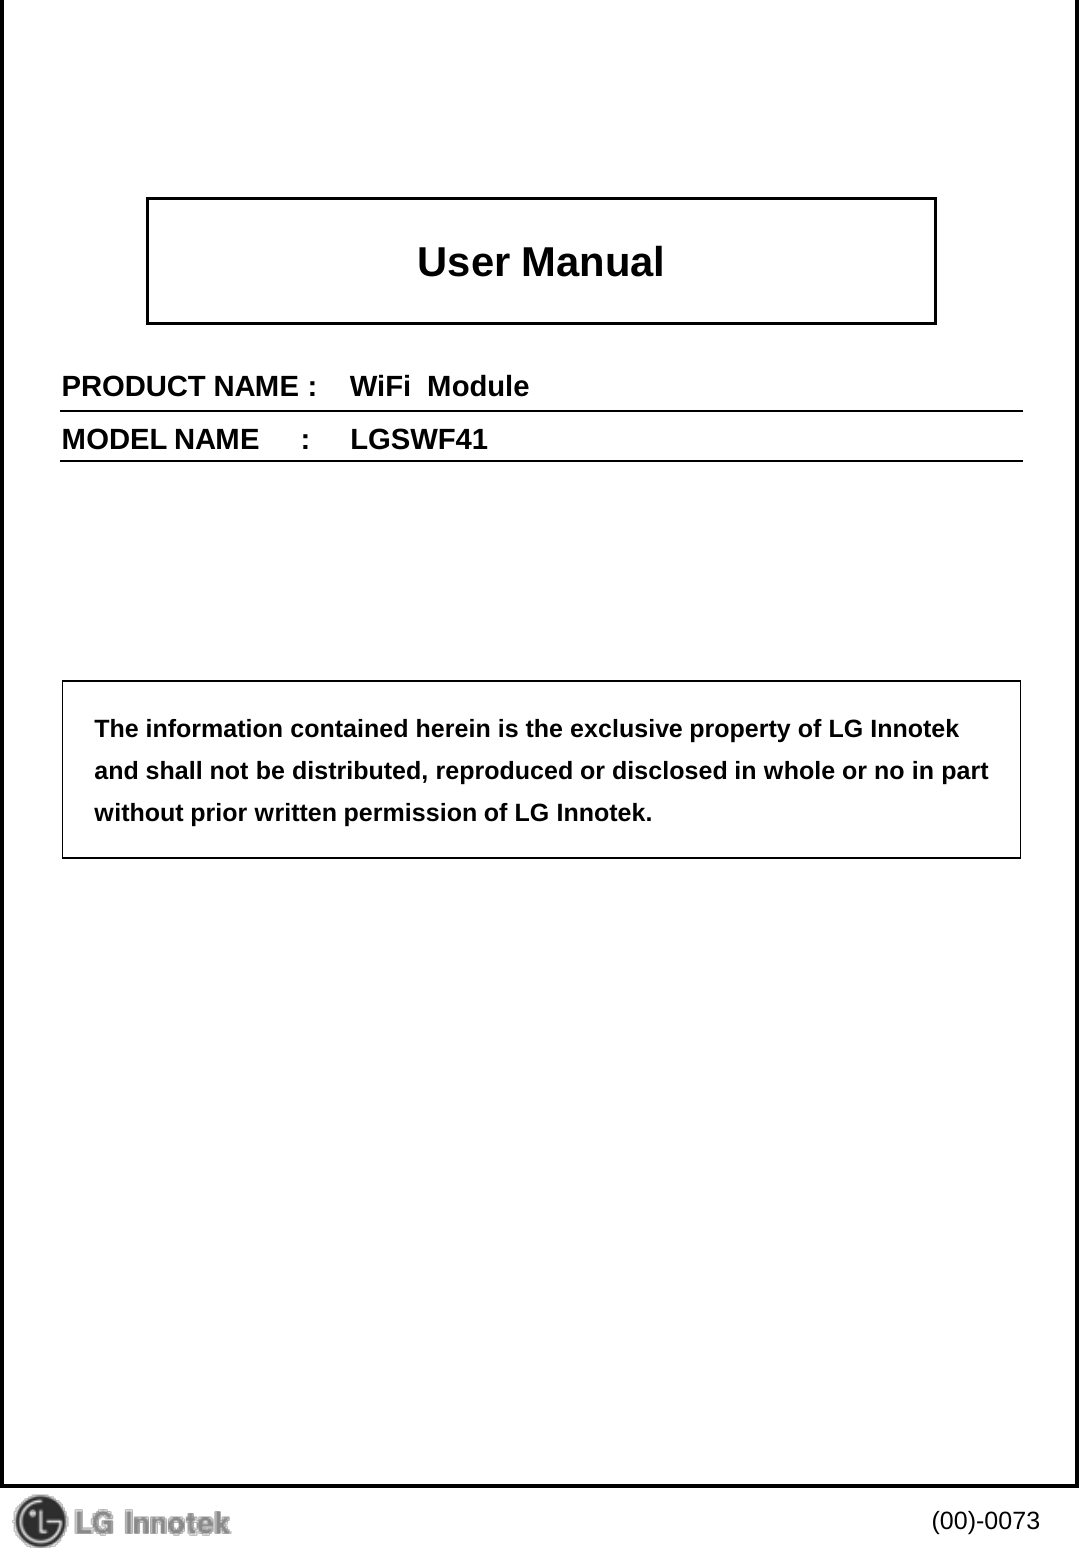 User Manual PRODUCT NAME :    WiFi  Module MODEL NAME     :     LGSWF41 (00)-0073 The information contained herein is the exclusive property of LG Innotek and shall not be distributed, reproduced or disclosed in whole or no in part without prior written permission of LG Innotek. 